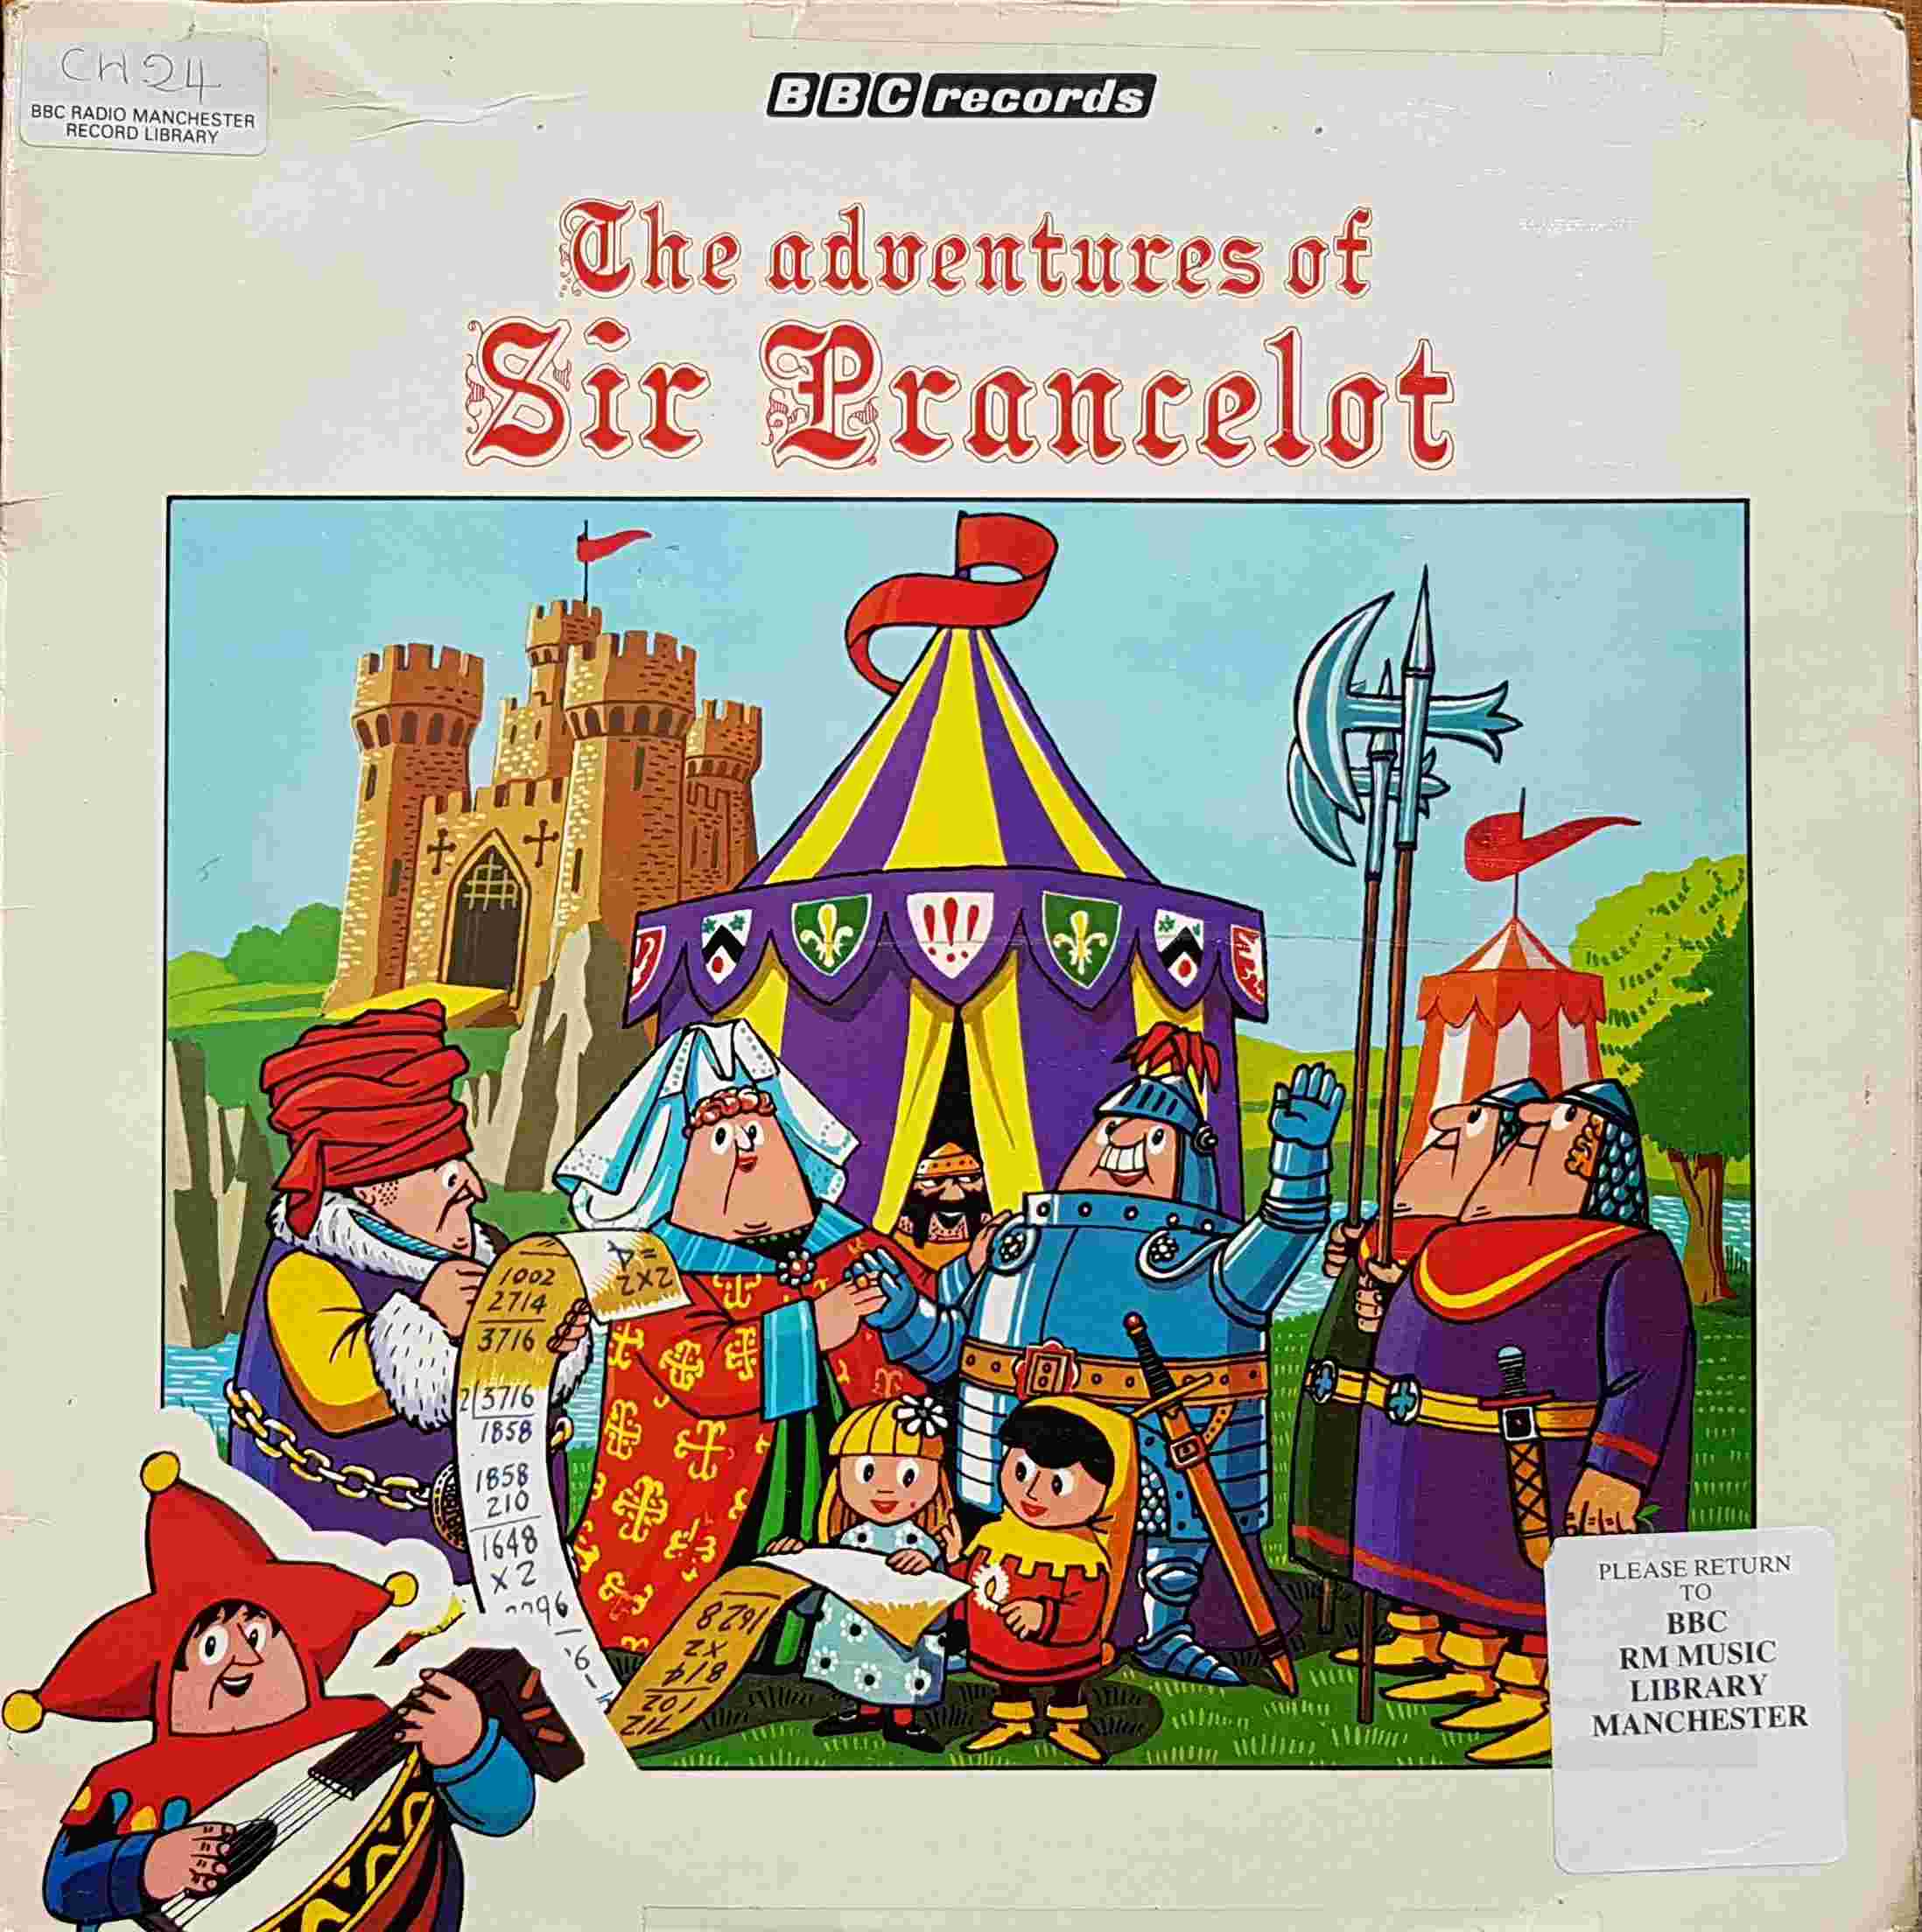 Picture of The adventures of Sir Prancelot by artist John Ryan from the BBC albums - Records and Tapes library